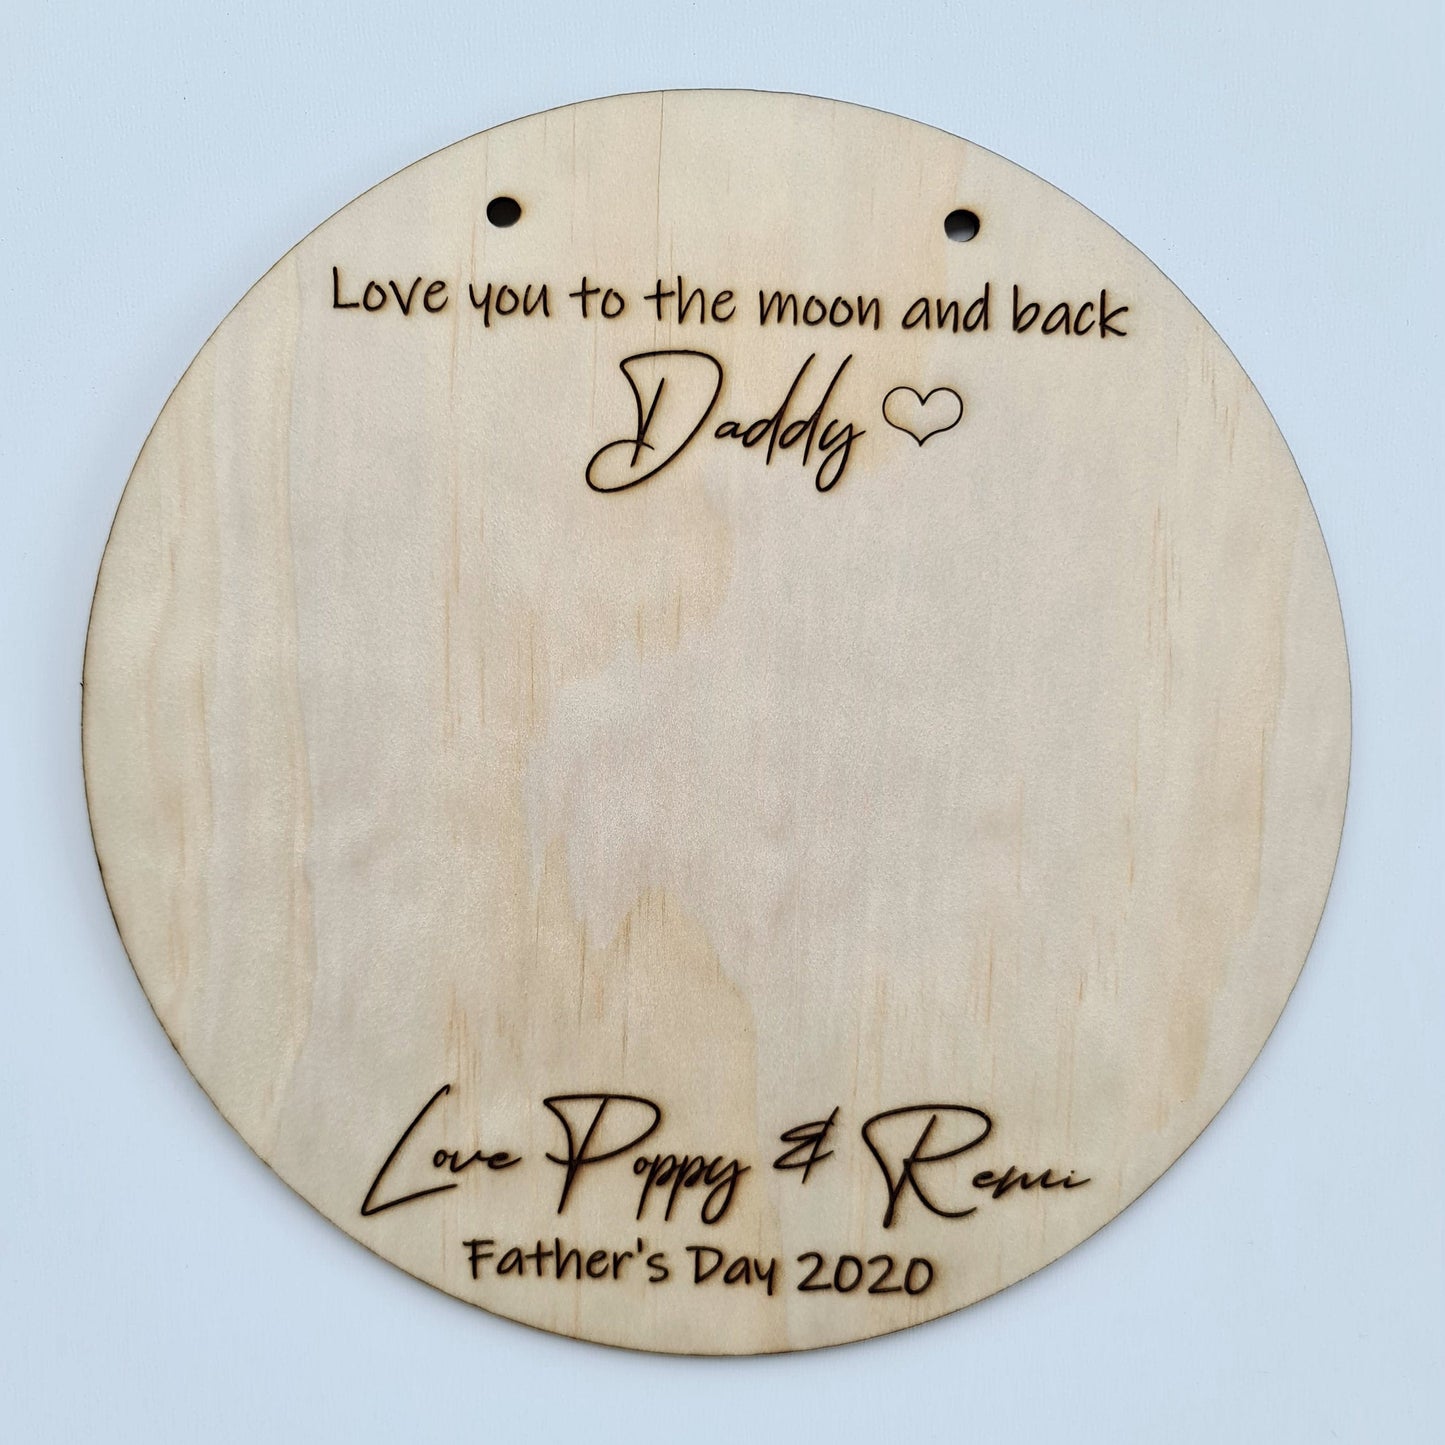 Qty 2 Father's Day Plaques ◽ Wall Hanging ◽ Dad's Day ◽ Dad ◽ Daddy ◽ Daddy's Day ◽ Grandpa ◽ Grandad